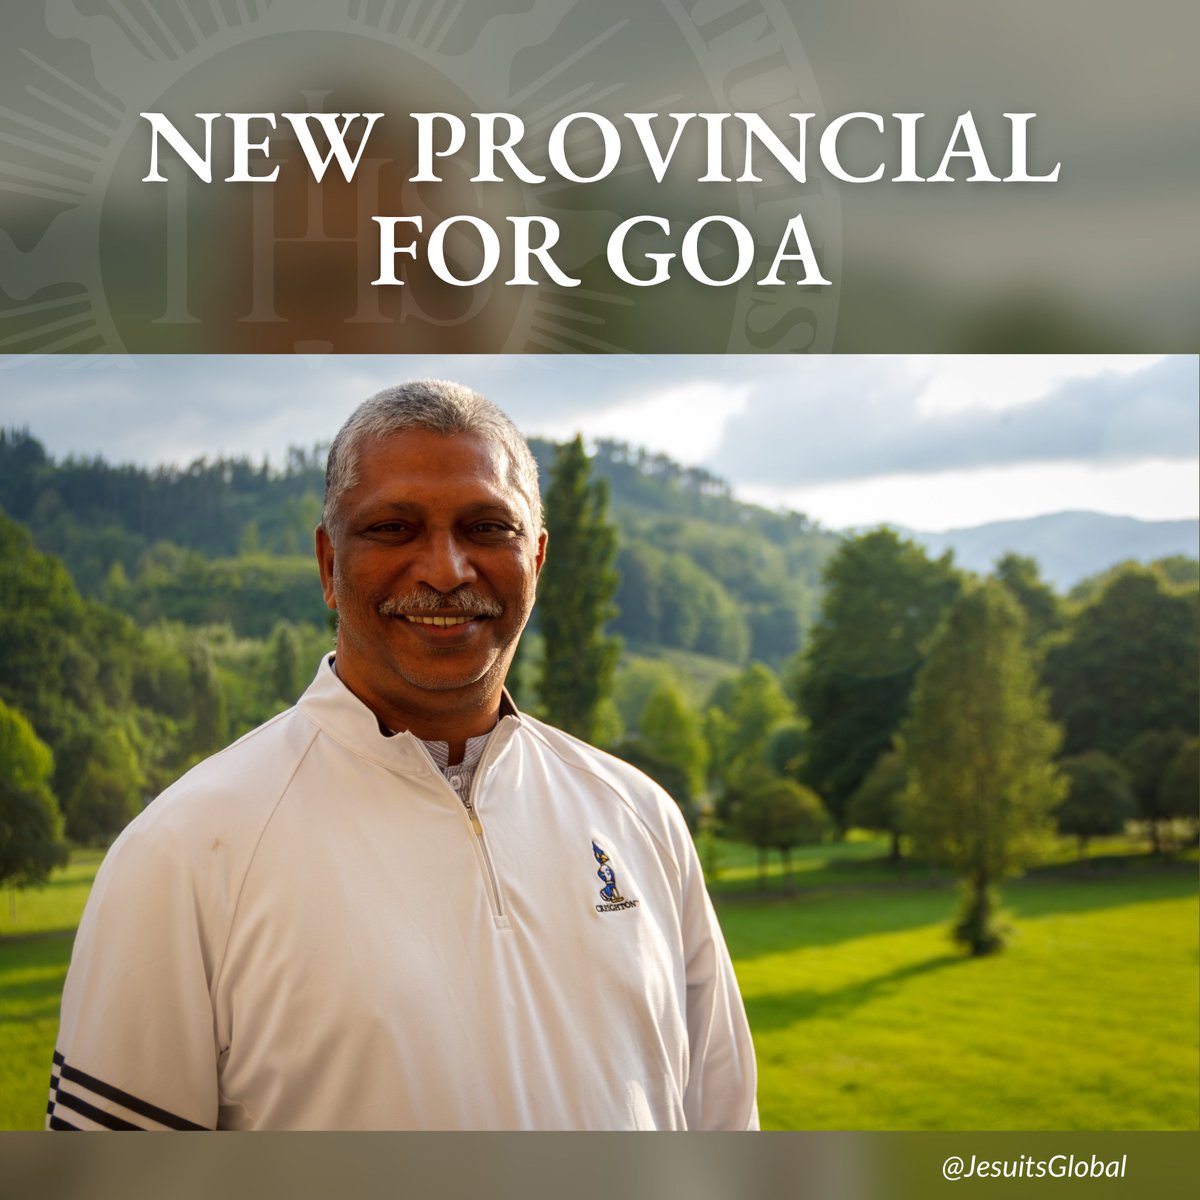 On 4 April, Fr Arturo Sosa, Superior General, announced the appointment of Fr Pedro Rodriguez, 55 years old, as the new Provincial of the Goa Province in India. He will assume office on 22 April, Feast of Mary, Mother of the Society of Jesus.